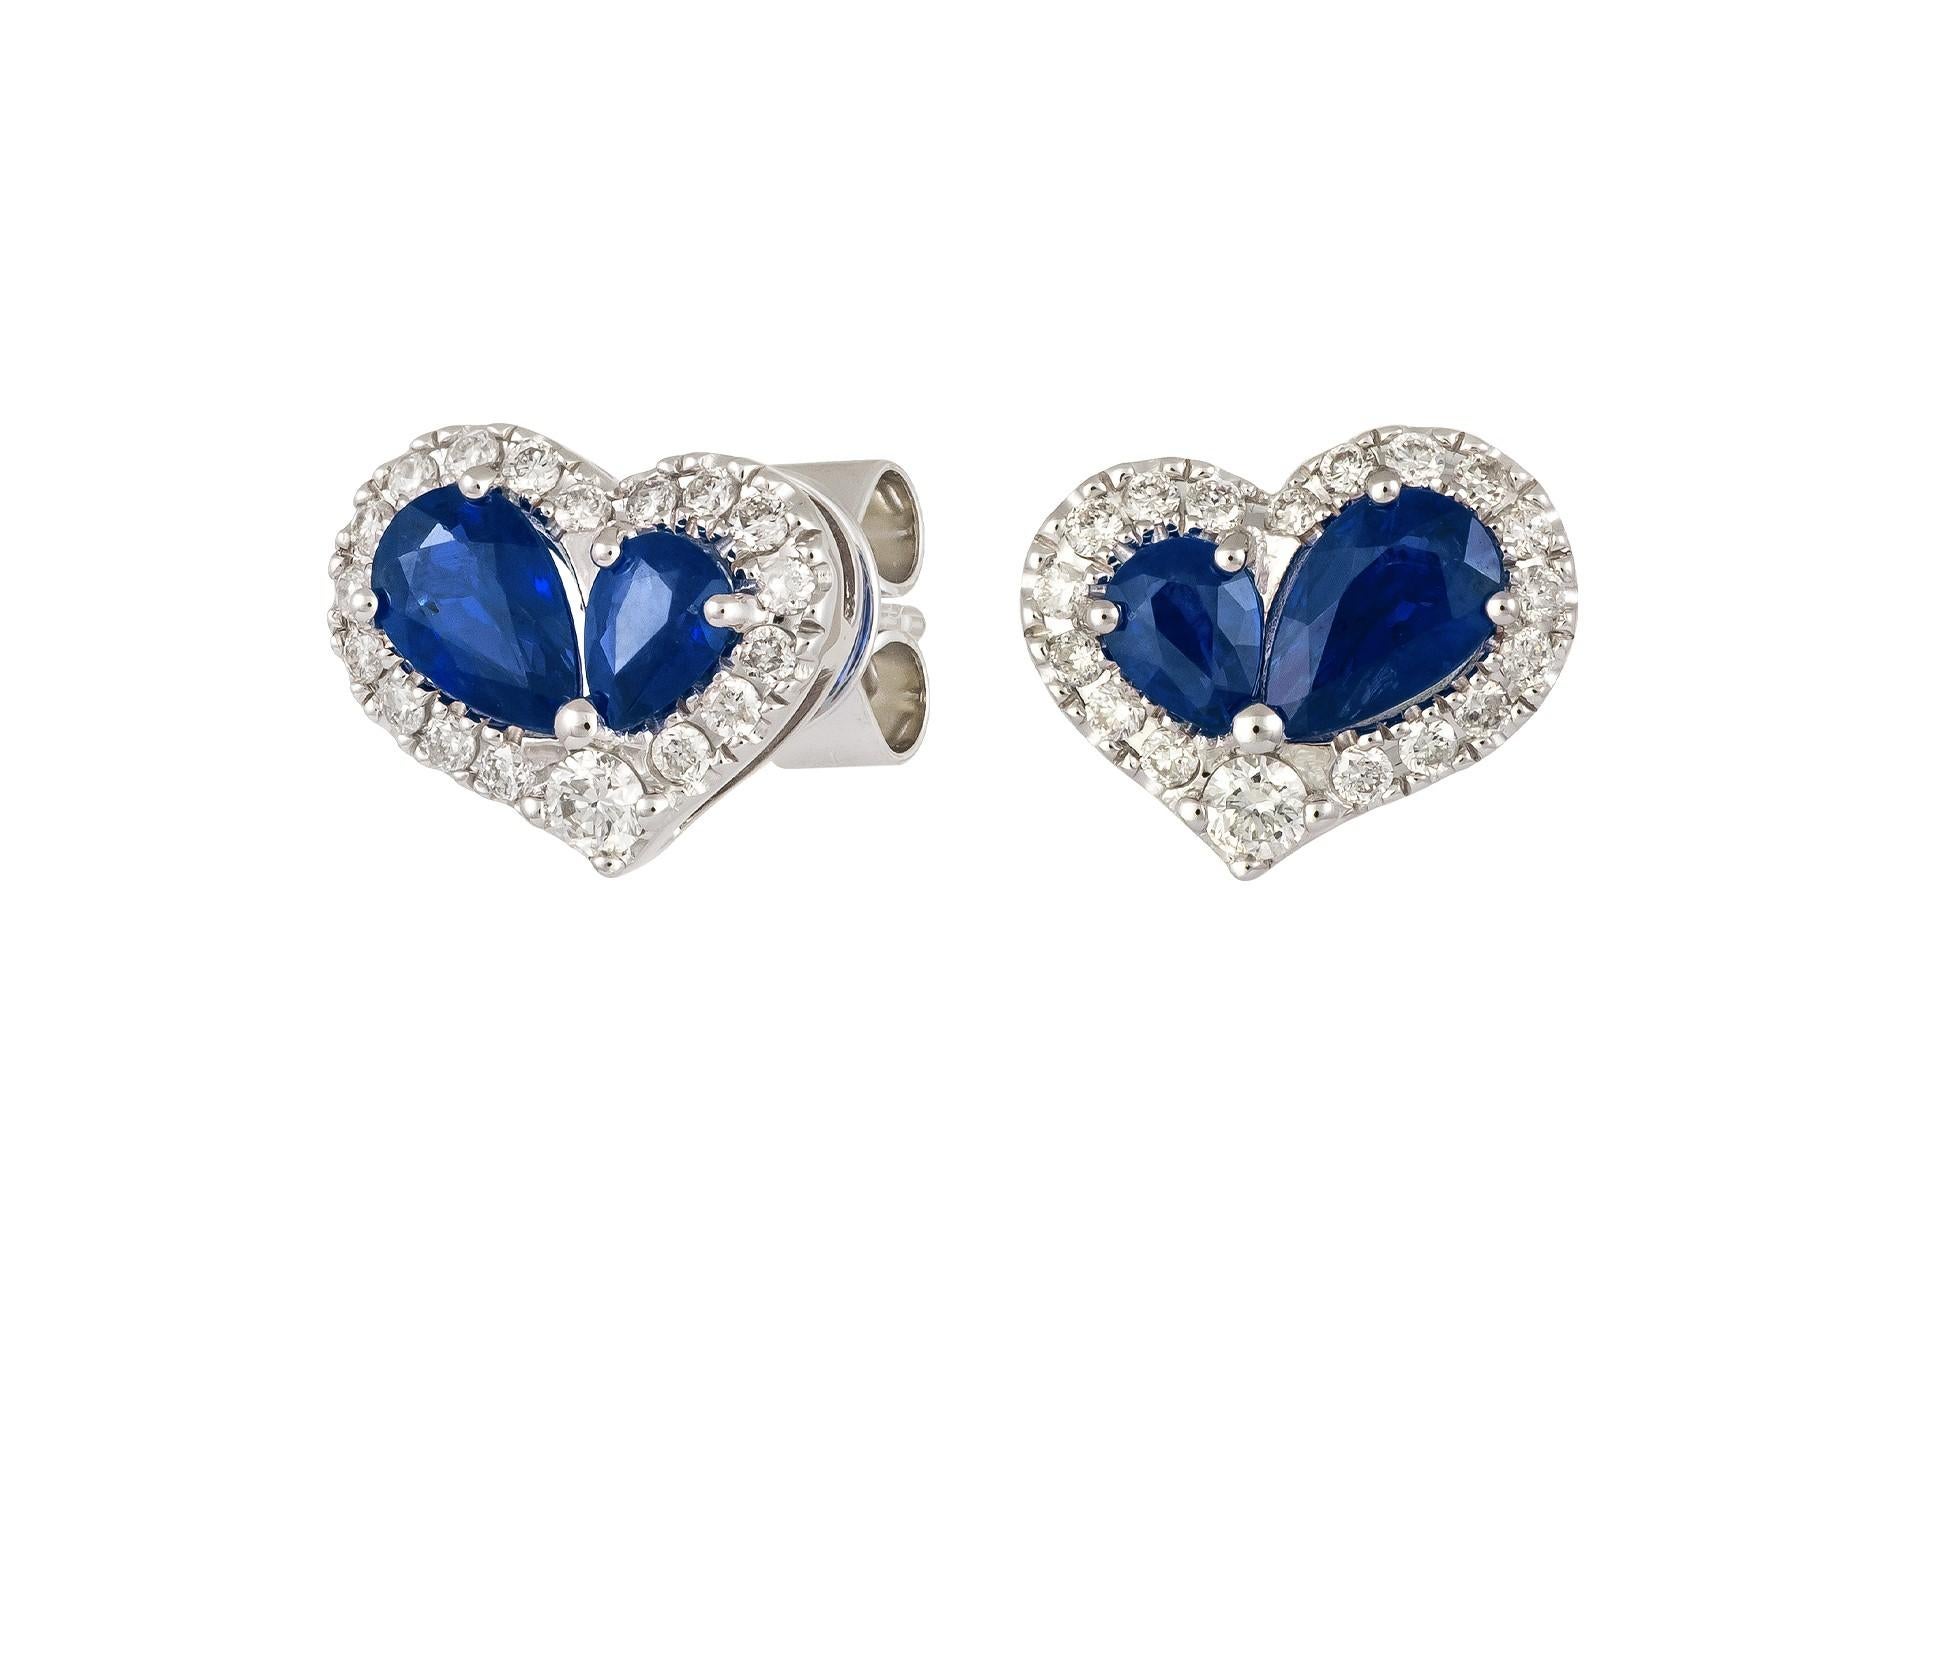 The Following Item we are offering is a Rare Important Radiant 18KT Gold Large Rare Gorgeous Fancy Blue Sapphire and Diamond Heart Stud Earrings. Earrings are comprised of Beautiful Glittering Sapphires and Gorgeous Diamonds!!! T.C.W. Approx 2CTS!!!